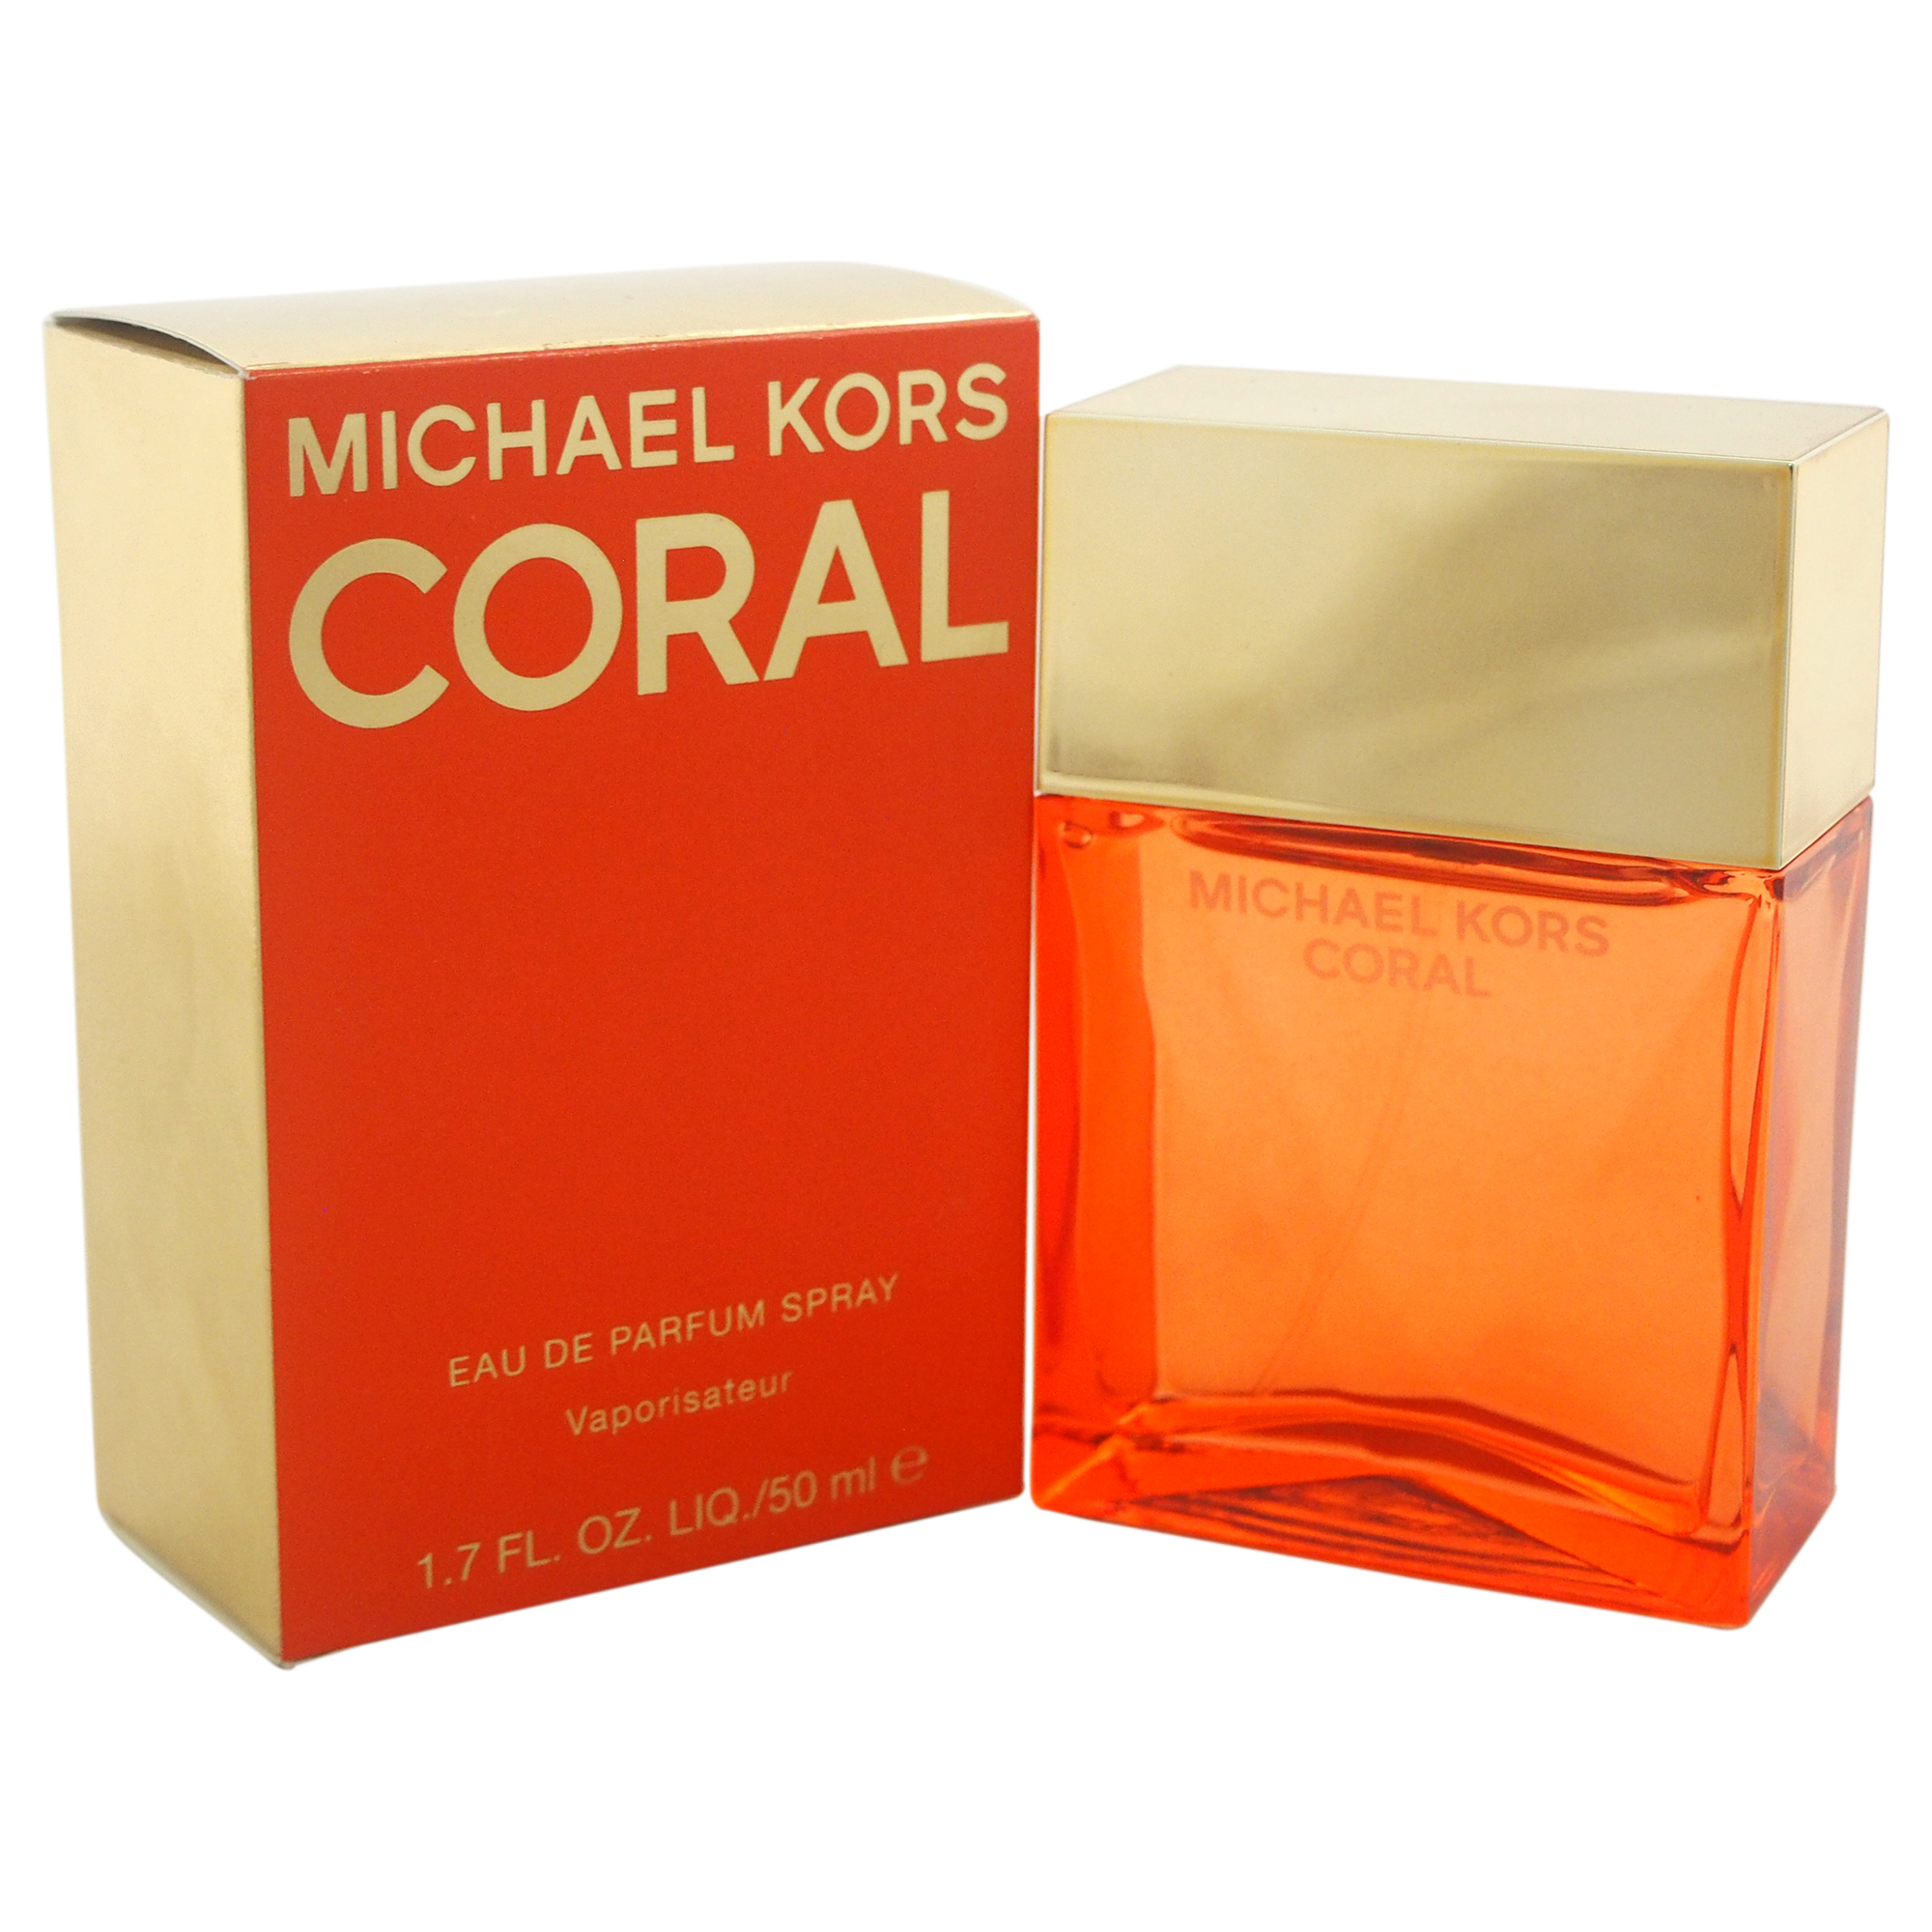 Michael Kors Coral by  for Women - 1.7 oz EDP Spray